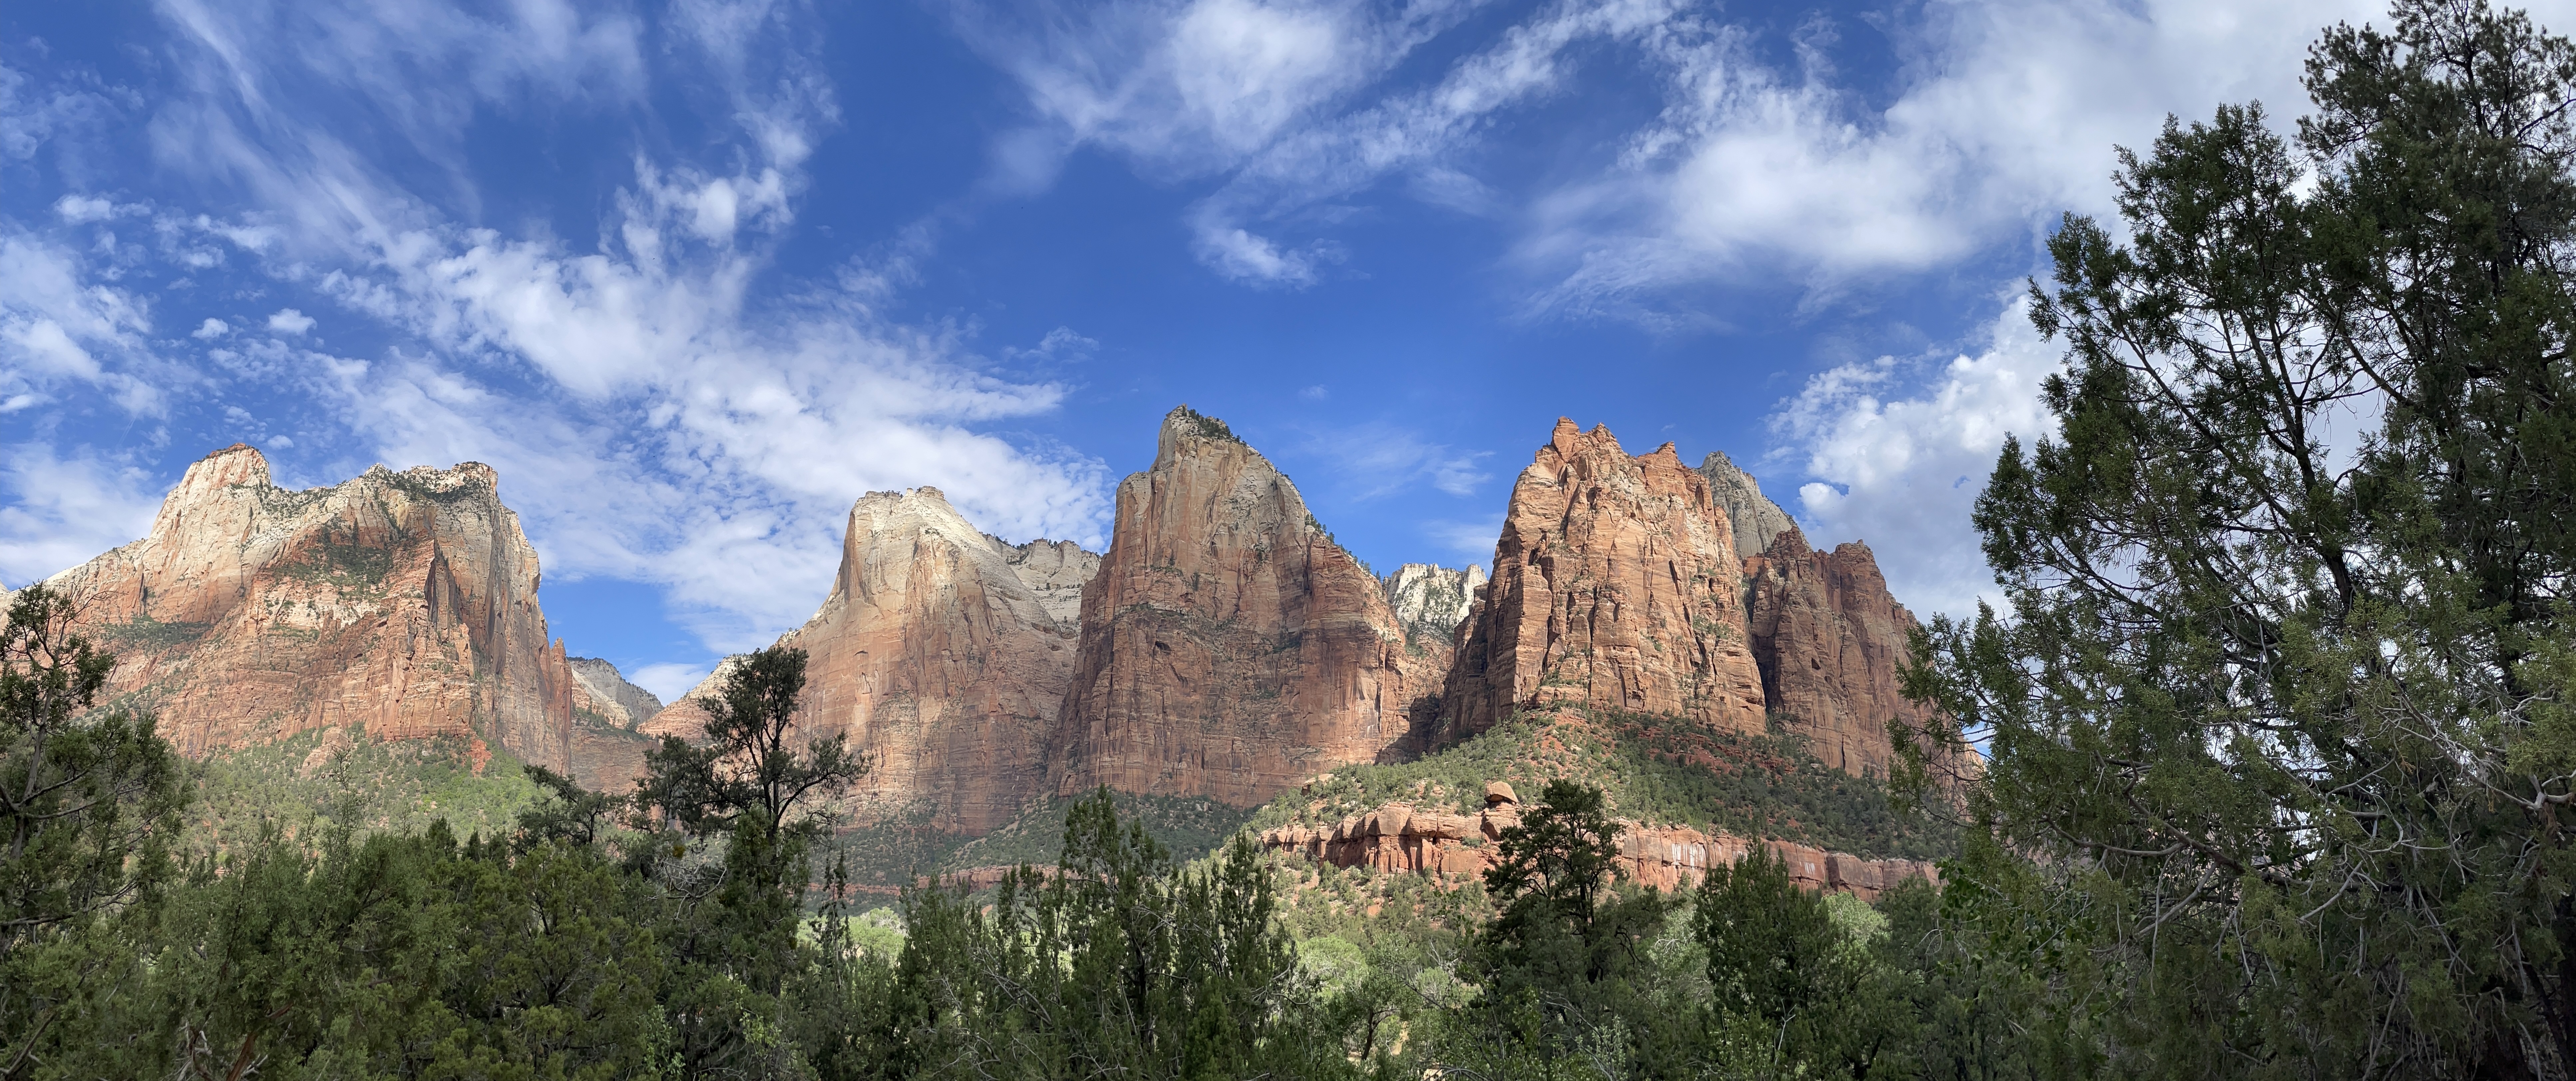 A panorama I took of the Court of Patriarchs mountains in Zion National Park in Utah